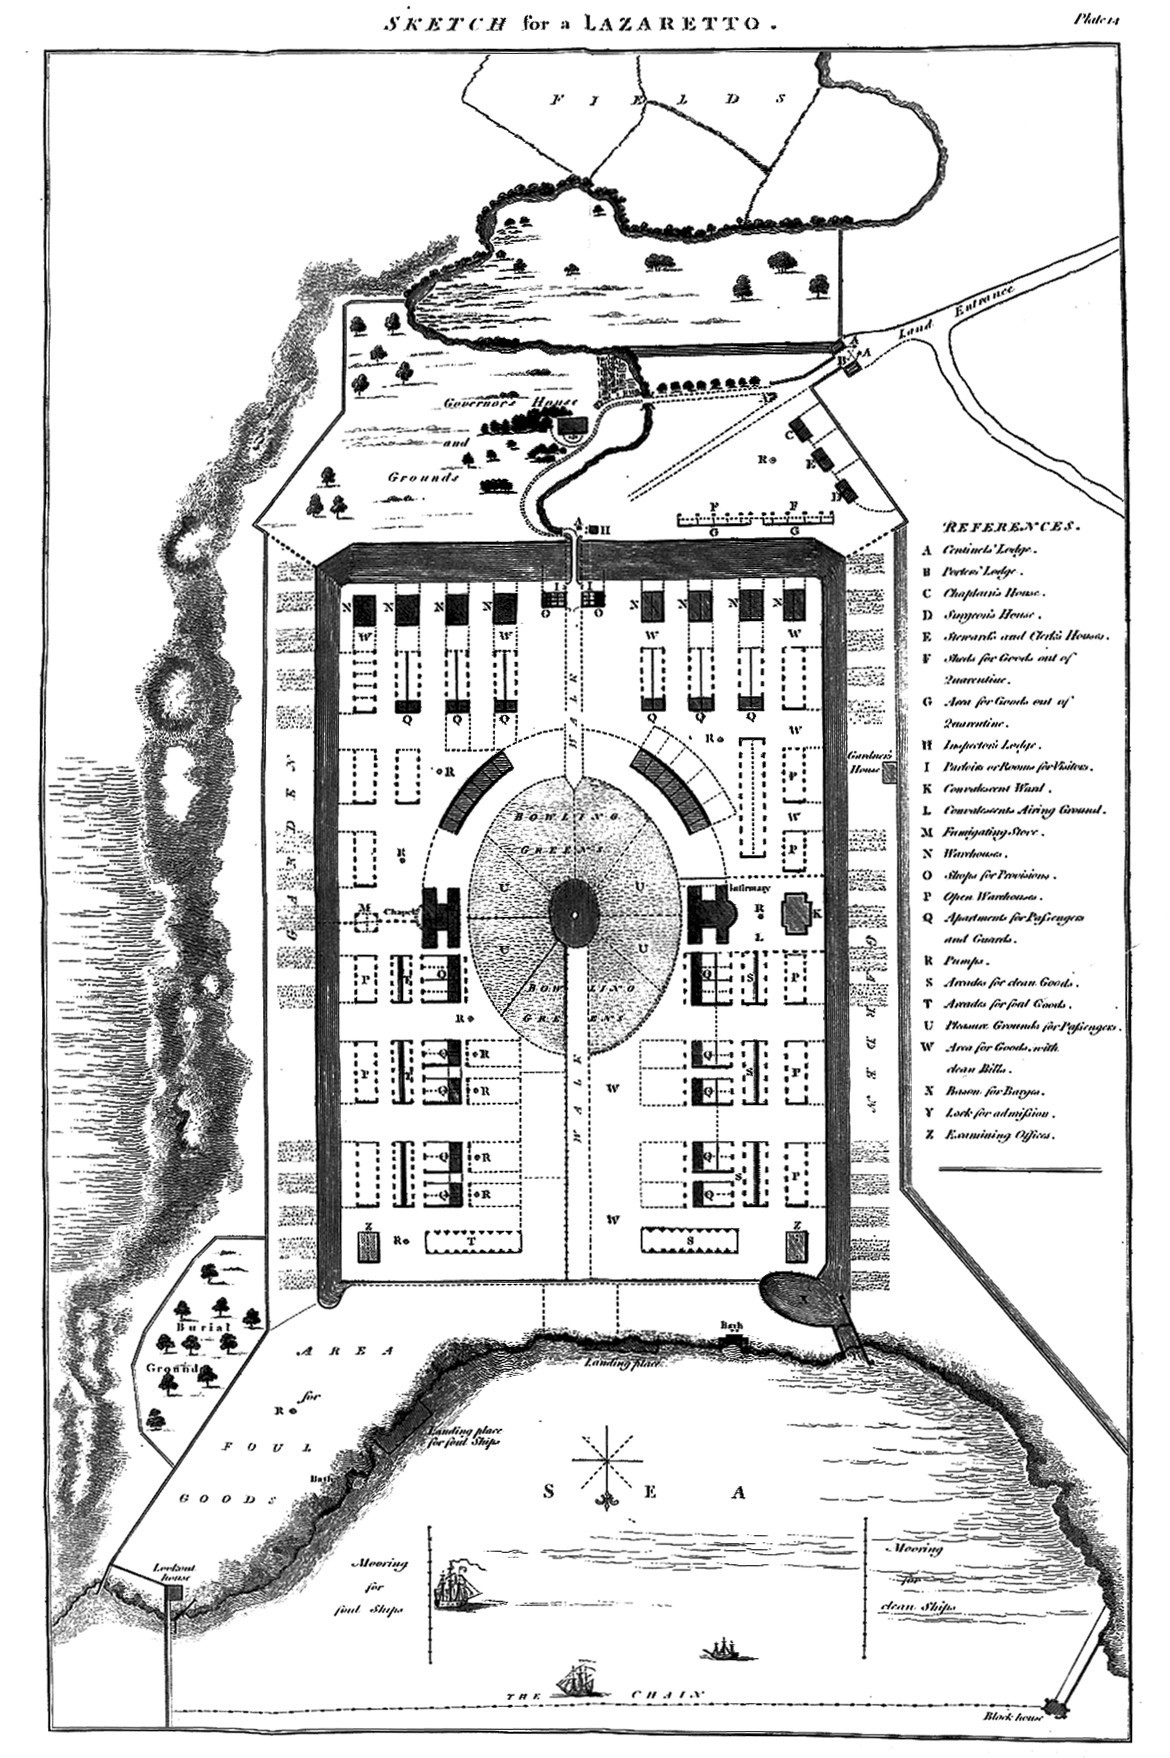 A plan for a lazaretto or isolation hospital, John Howard, 1789.